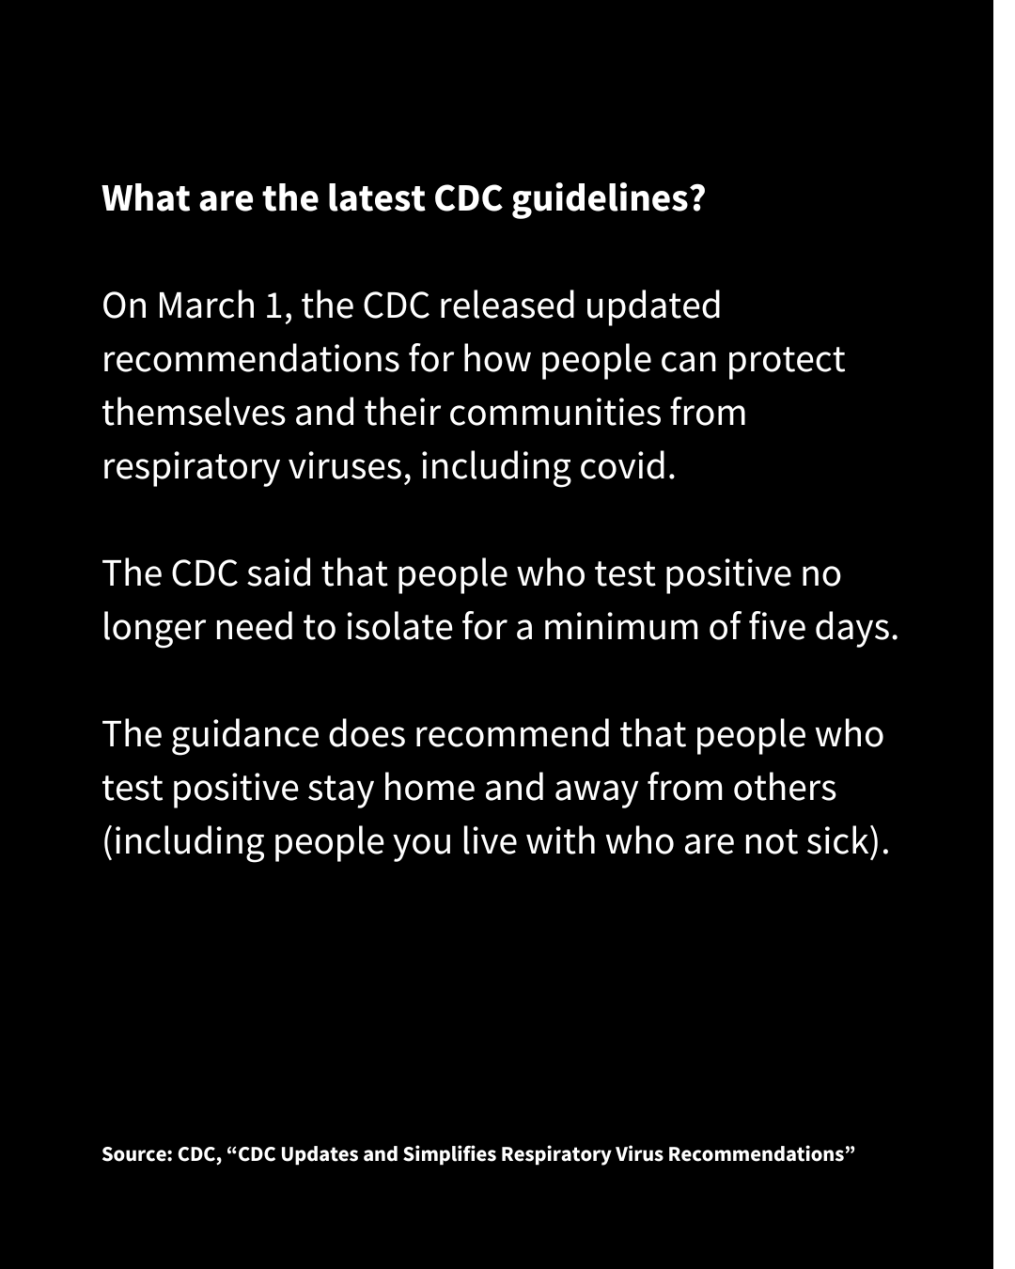 A slide with white text on a black background reads: What are the latest CDC guidelines?On March 1, the CDC released updated recommendations for how people can protect themselves and their communities from respiratory viruses, including covid.  The CDC said that people who test positive no longer need to isolate for a minimum of five days. The guidance does recommend that people who test positive stay home and away from others (including people you live with who are not sick). Source: CDC, “CDC Updates and Simplifies Respiratory Virus Recommendations” 